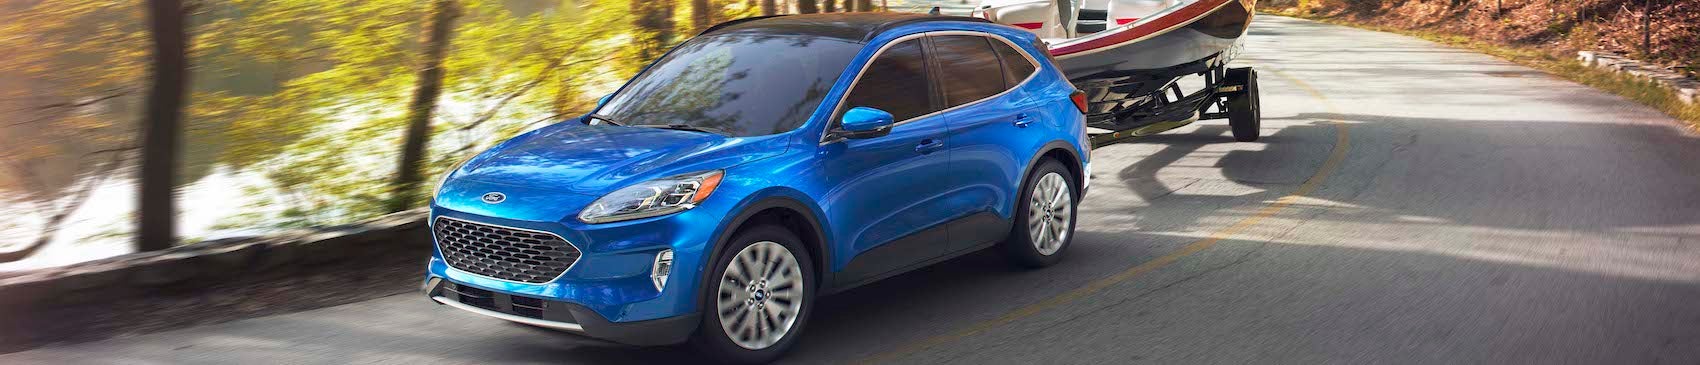 2020 Ford Escape Safety Ratings